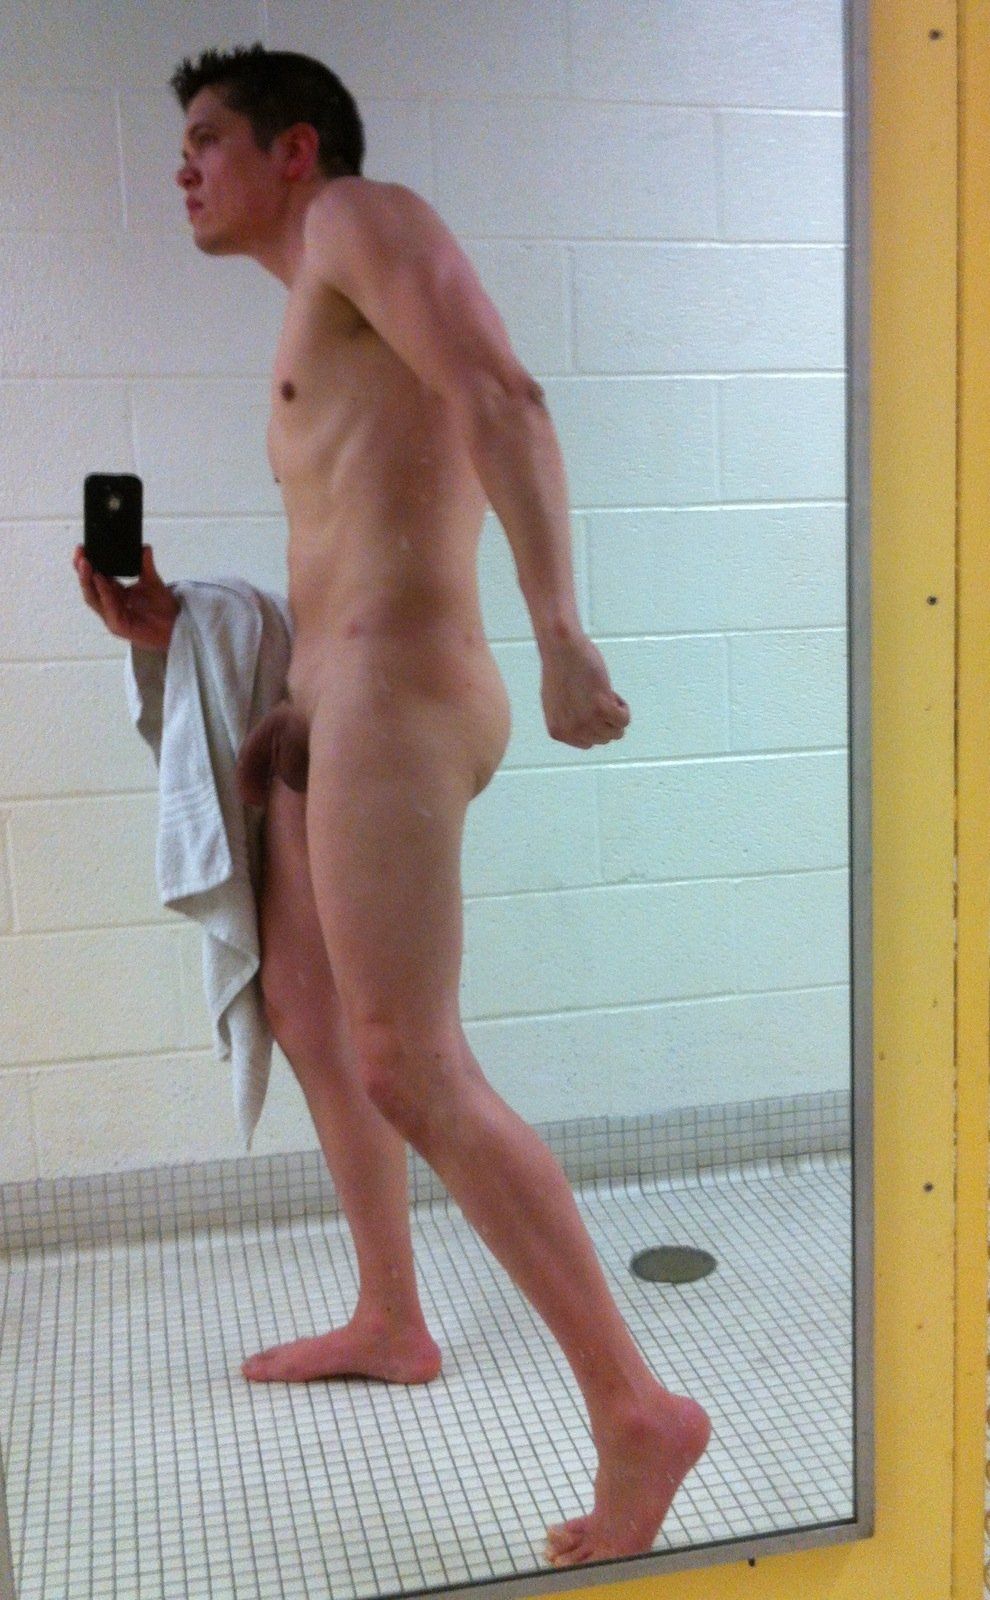 Nude at the gym guy